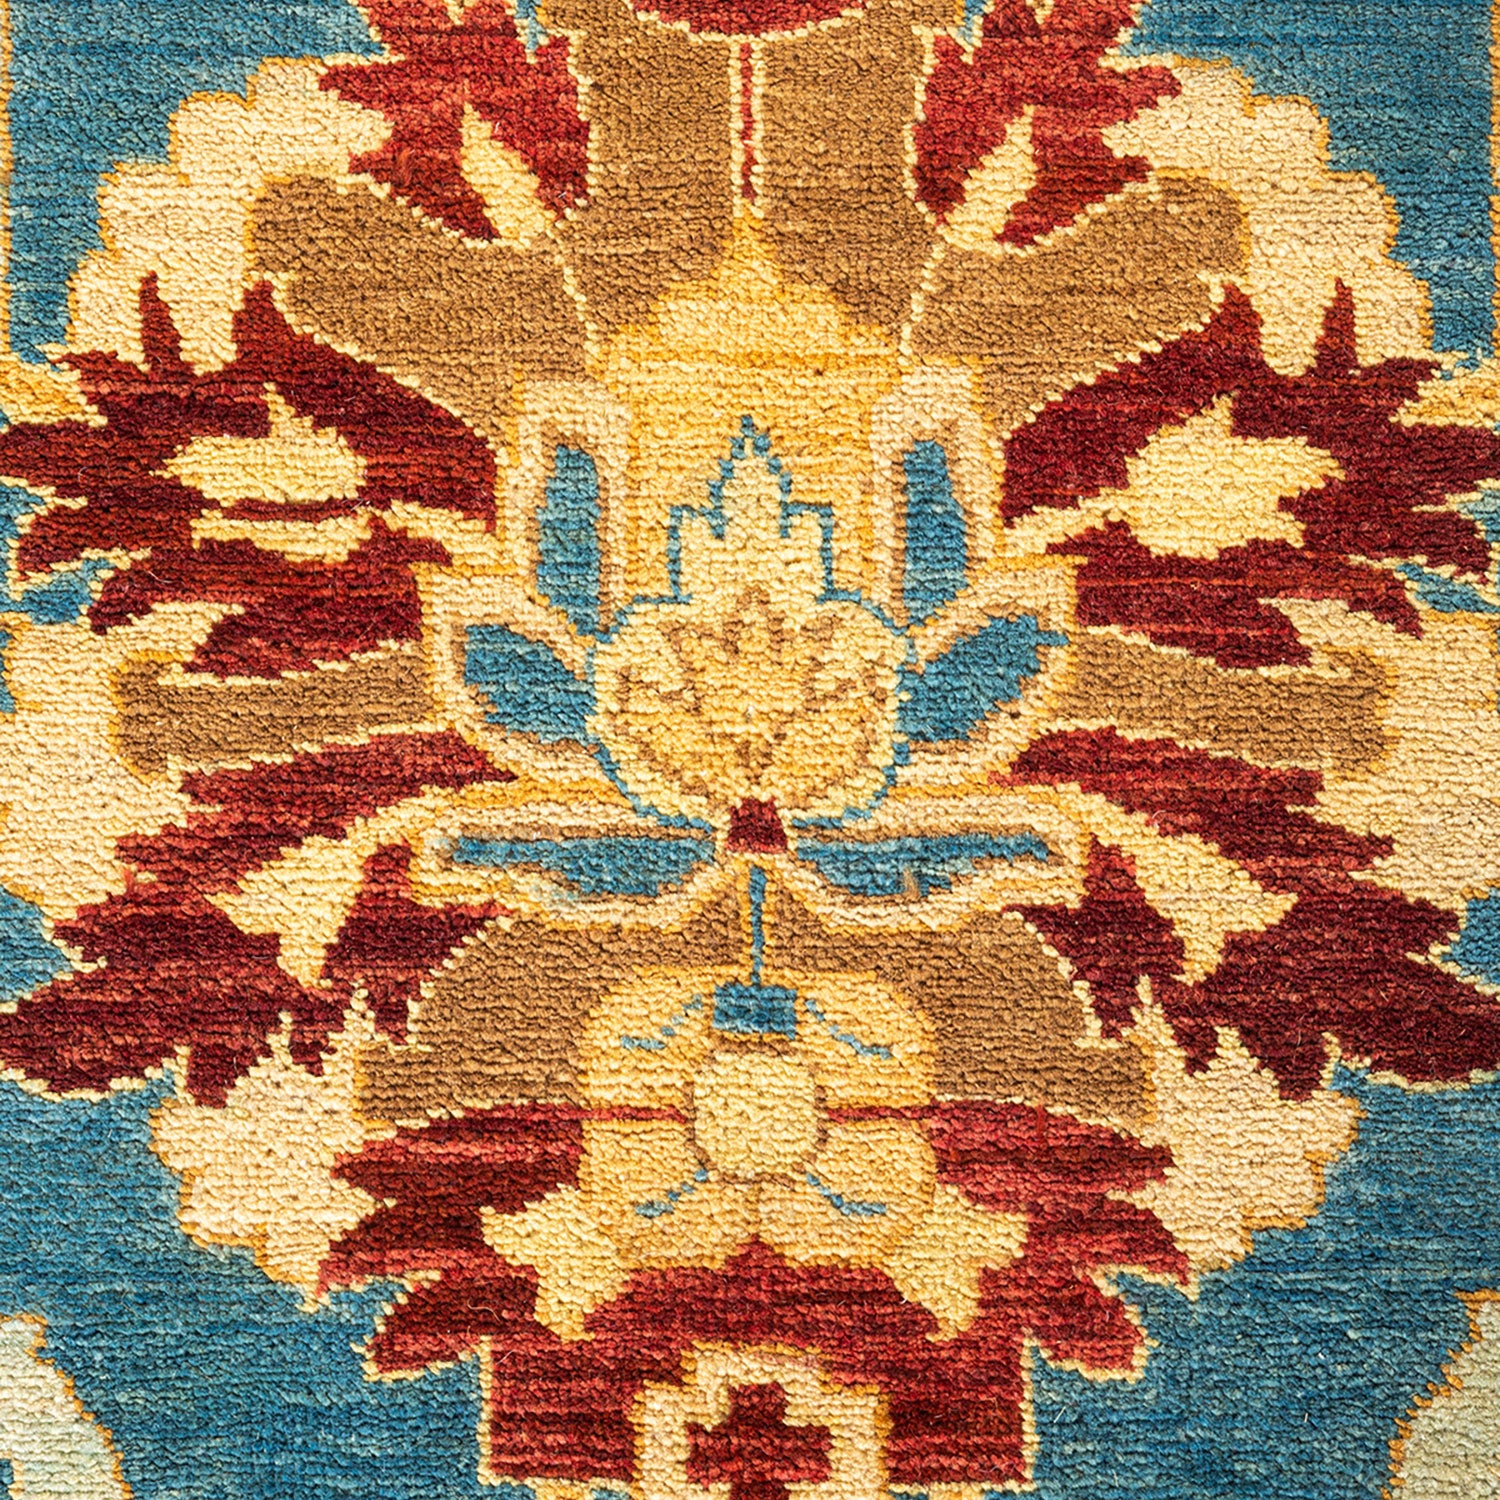 Intricate, symmetrical floral motifs in vibrant colors on textile.